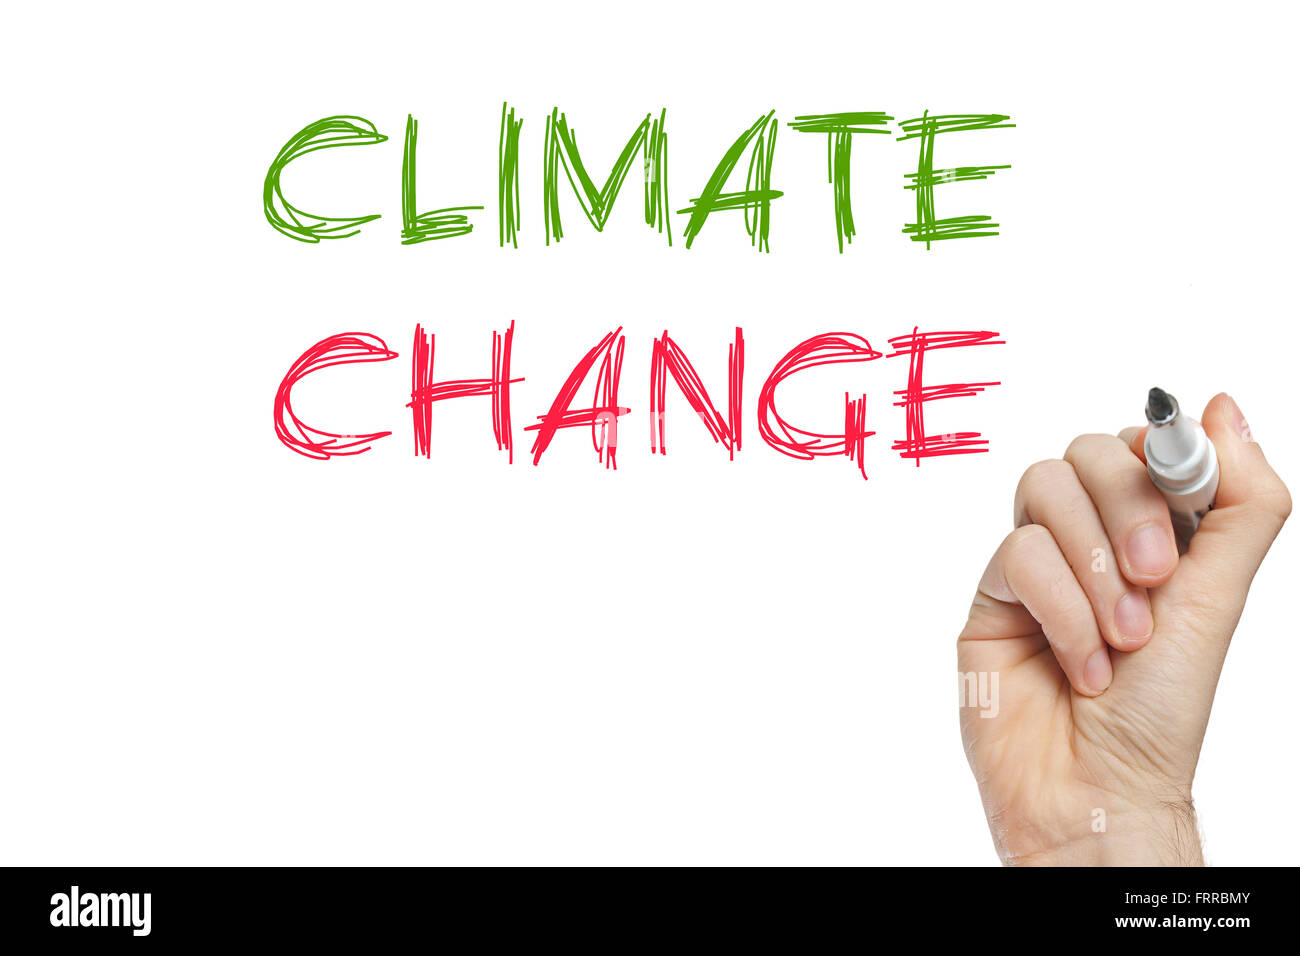 Hand writing climate change on a white board Stock Photo